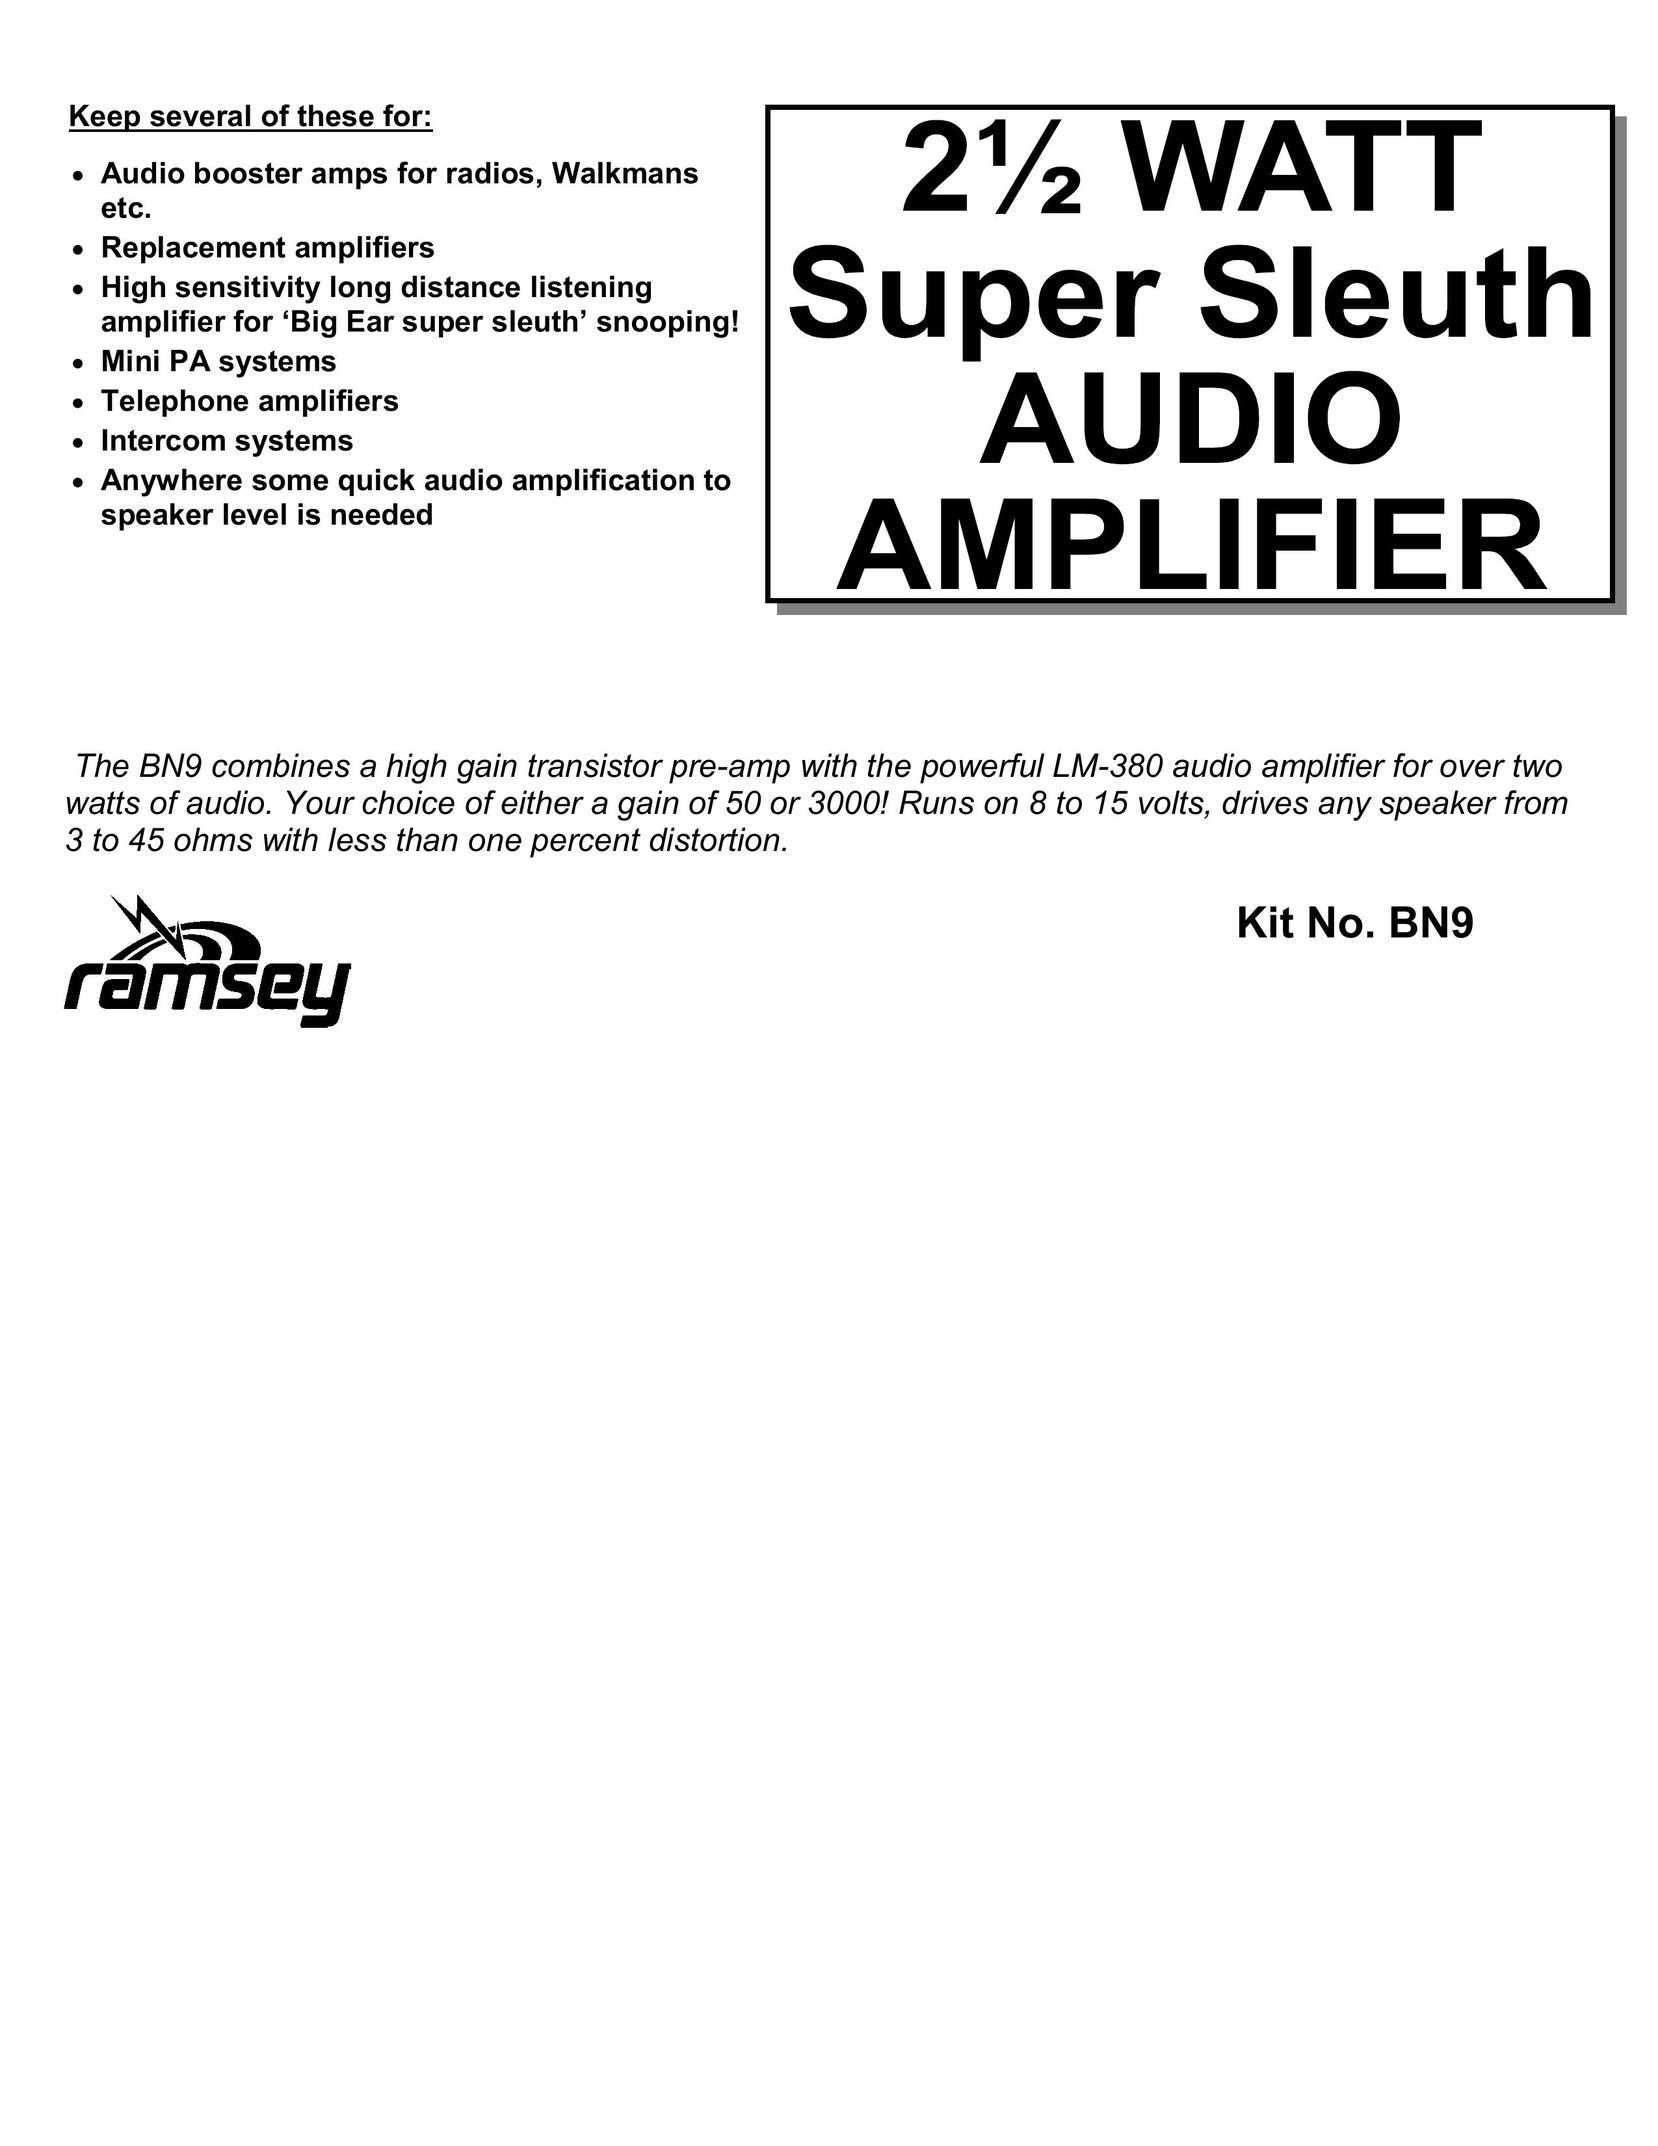 Ramsey Electronics BN9 Stereo Amplifier User Manual